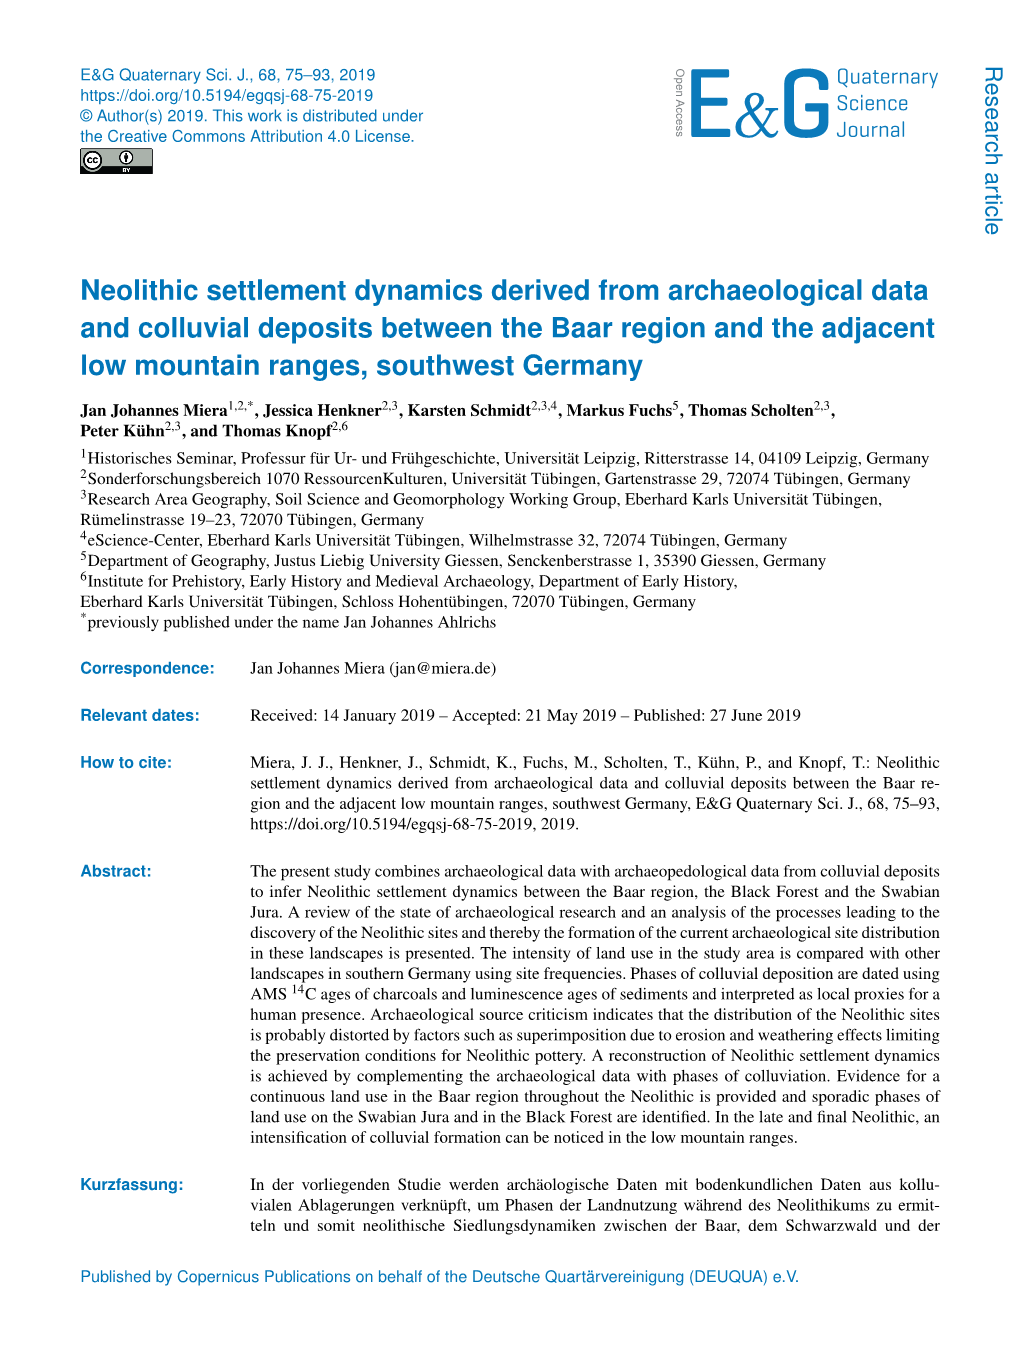 Neolithic Settlement Dynamics Derived from Archaeological Data and Colluvial Deposits Between the Baar Region and the Adjacent Low Mountain Ranges, Southwest Germany